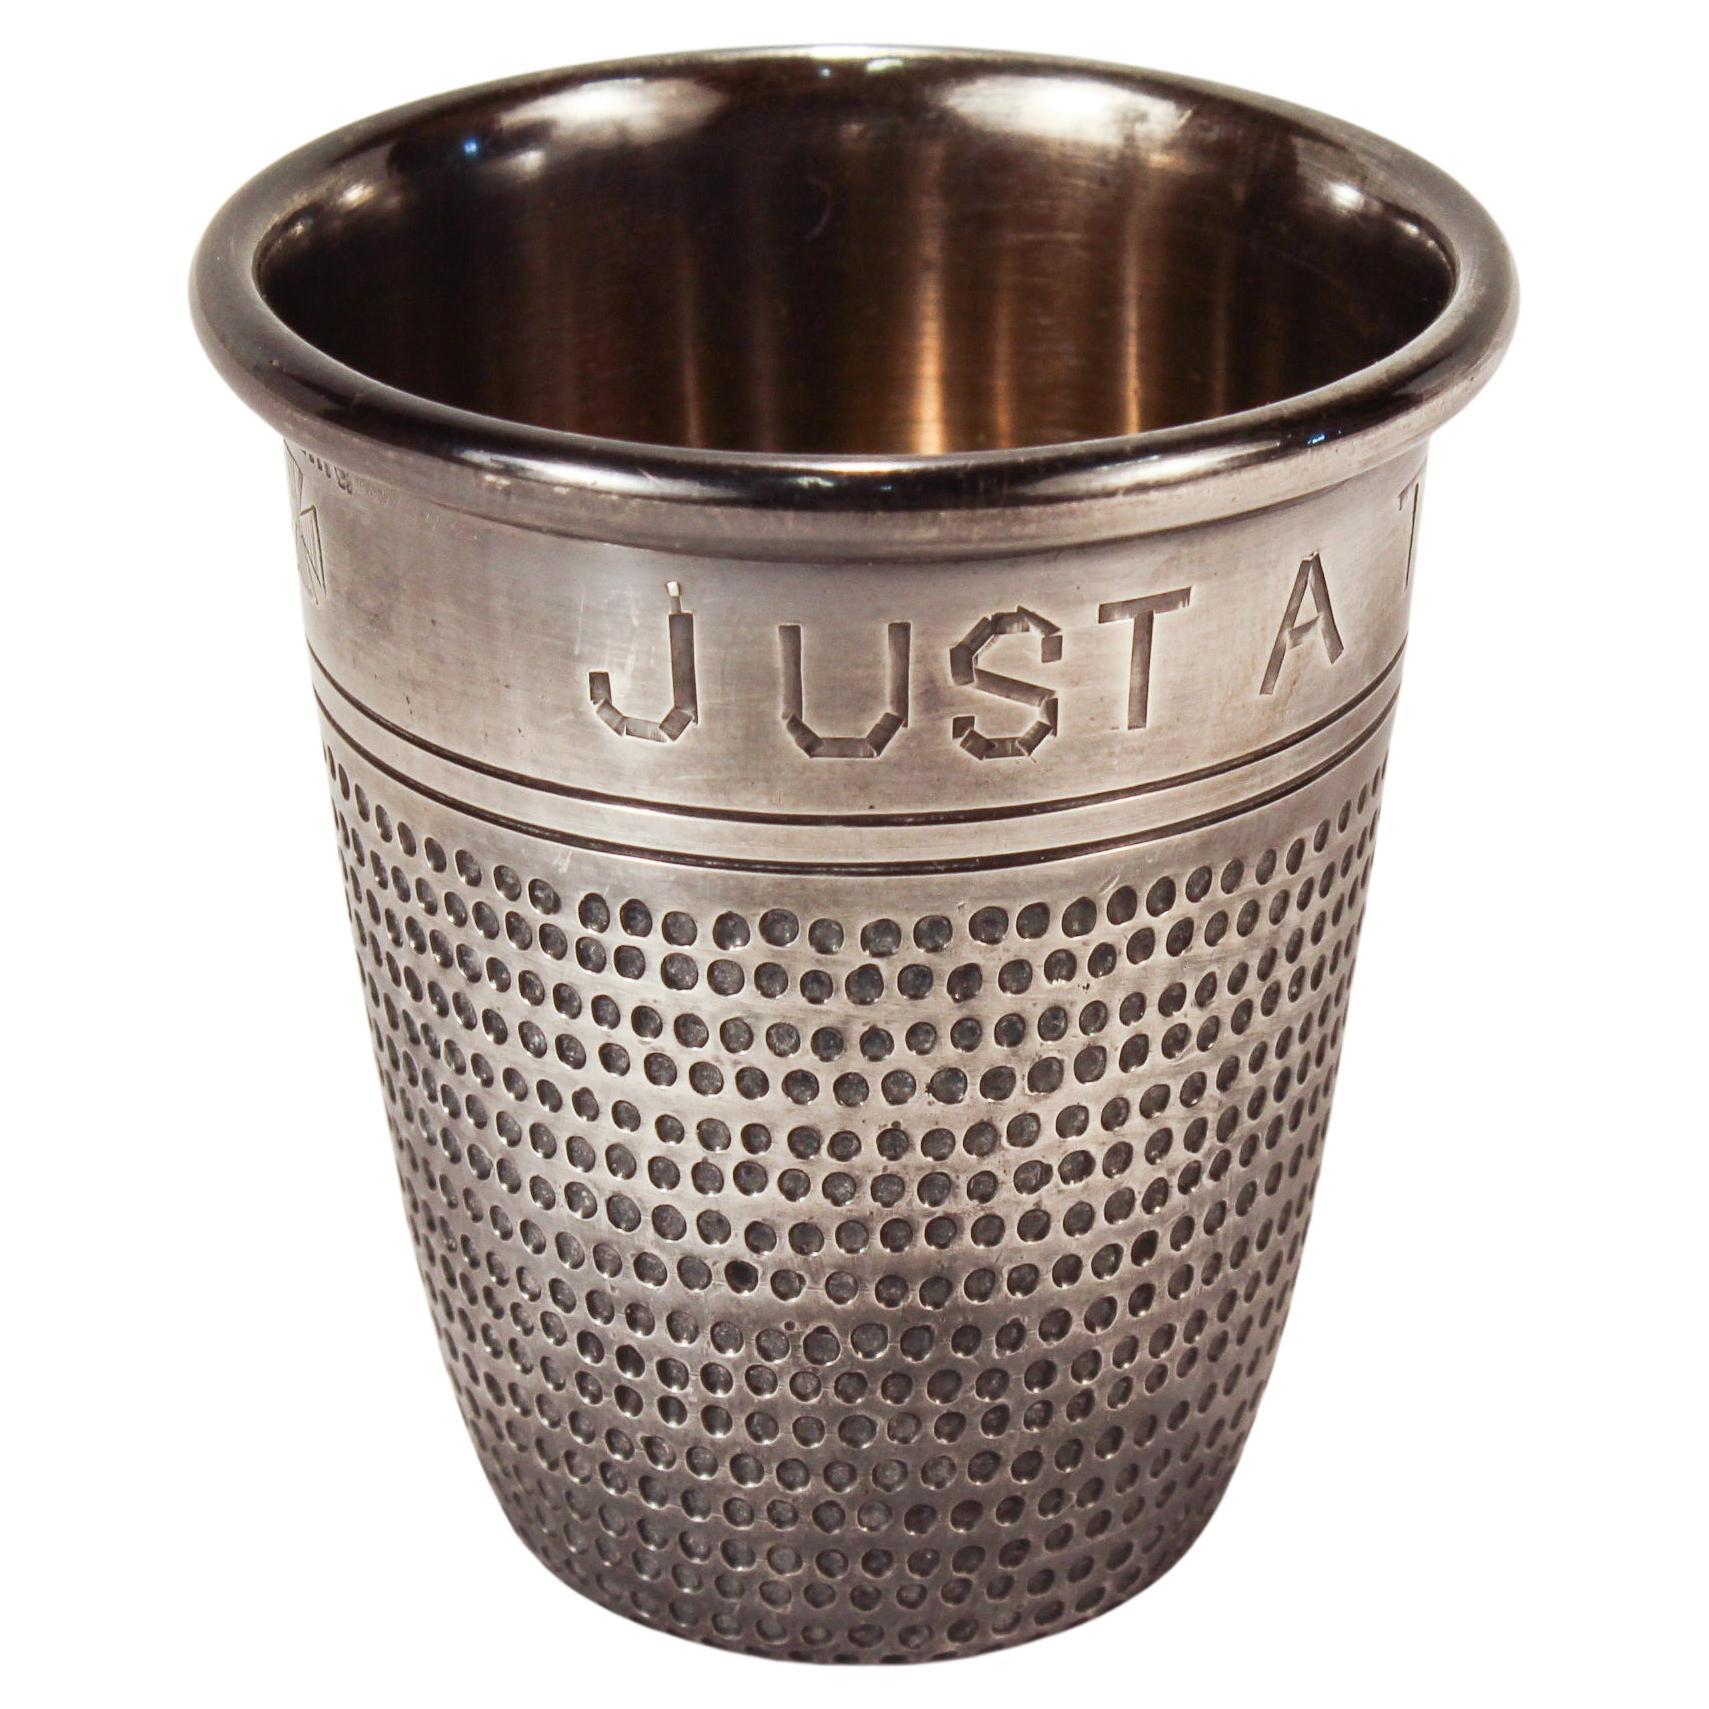 A fine antique sterling silver liquor measure or jigger.

In the form of an over-sized silver thimble. 

Engraved around the rim 